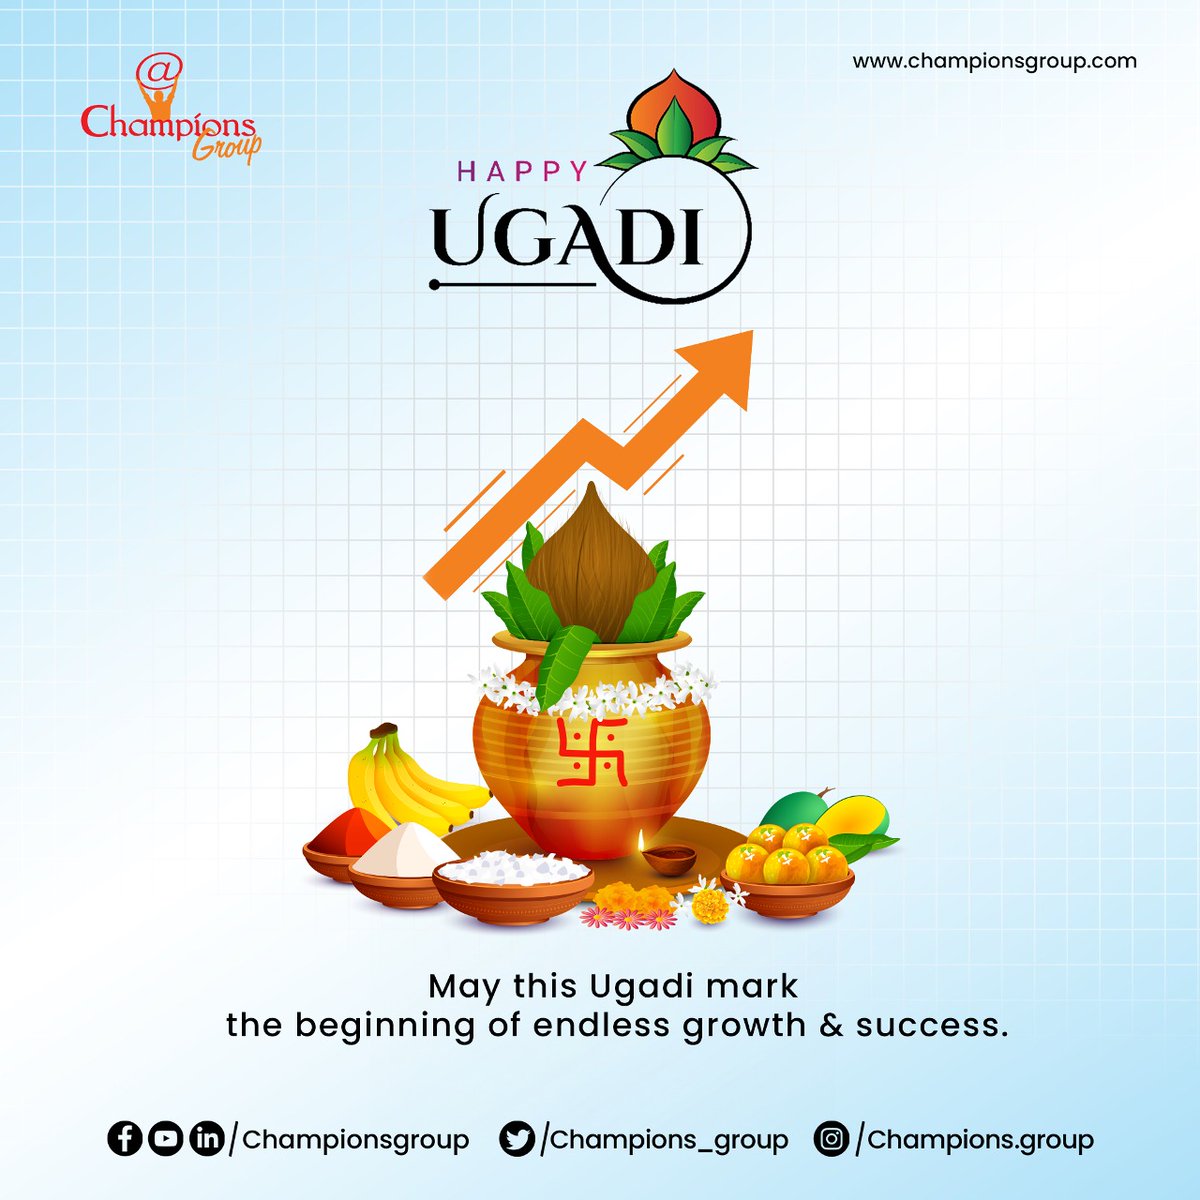 🌼 Happy Ugadi from Champions Group! Embrace new beginnings, celebrate tradition, and spread joy & prosperity. Wishing you a year of success and happiness! #Ugadi #ChampionsGroup #HappyUGADI